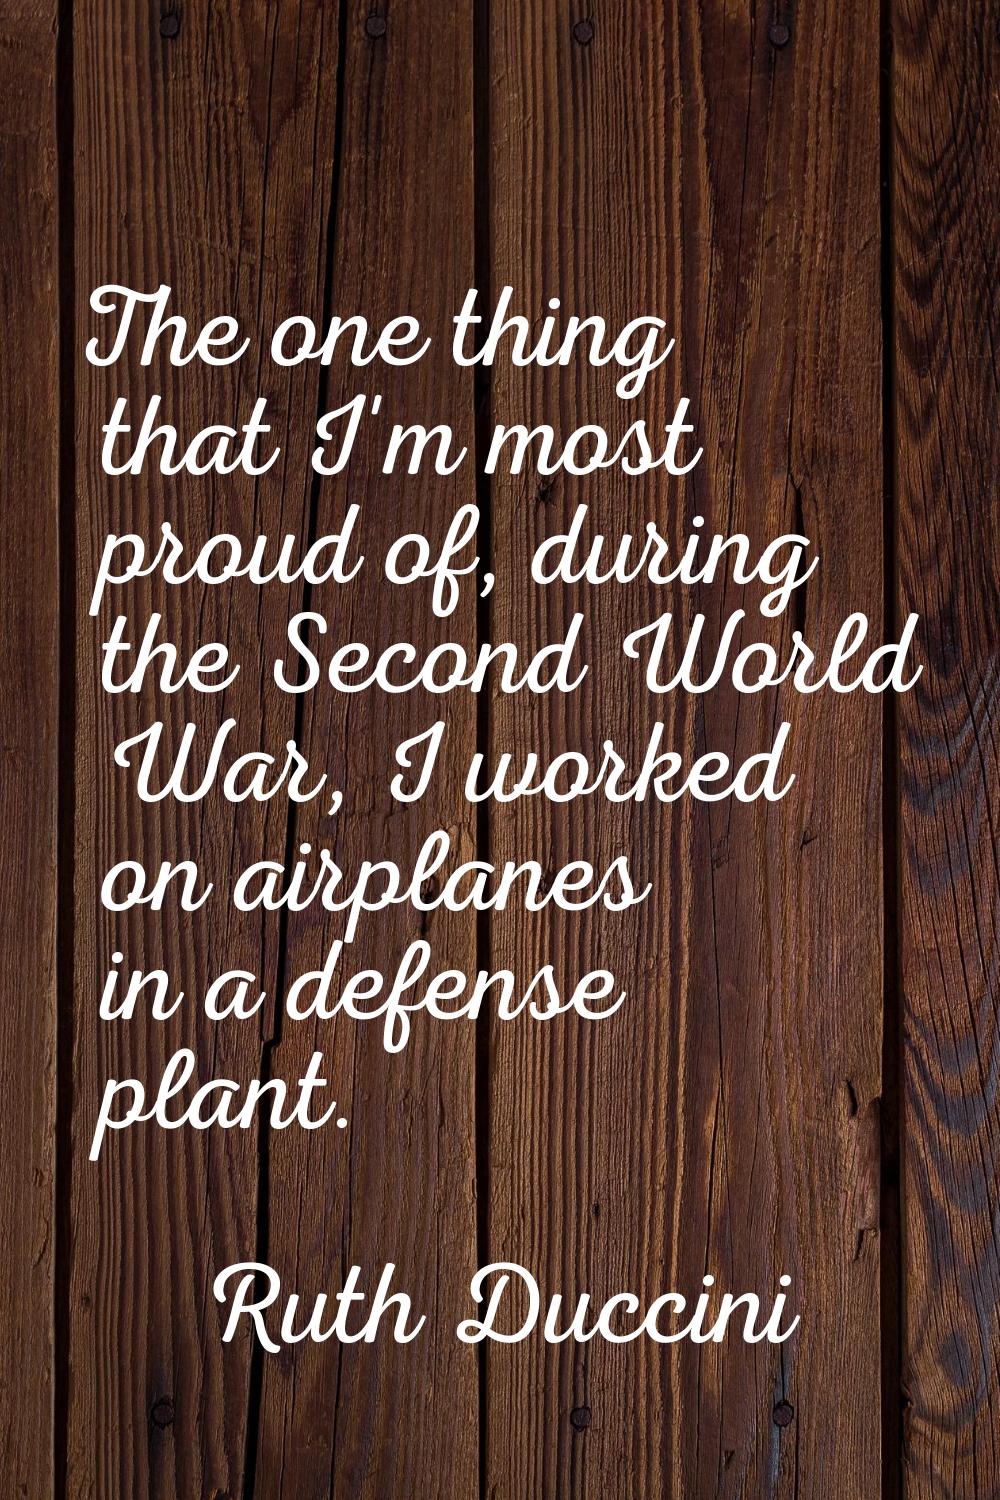 The one thing that I'm most proud of, during the Second World War, I worked on airplanes in a defen